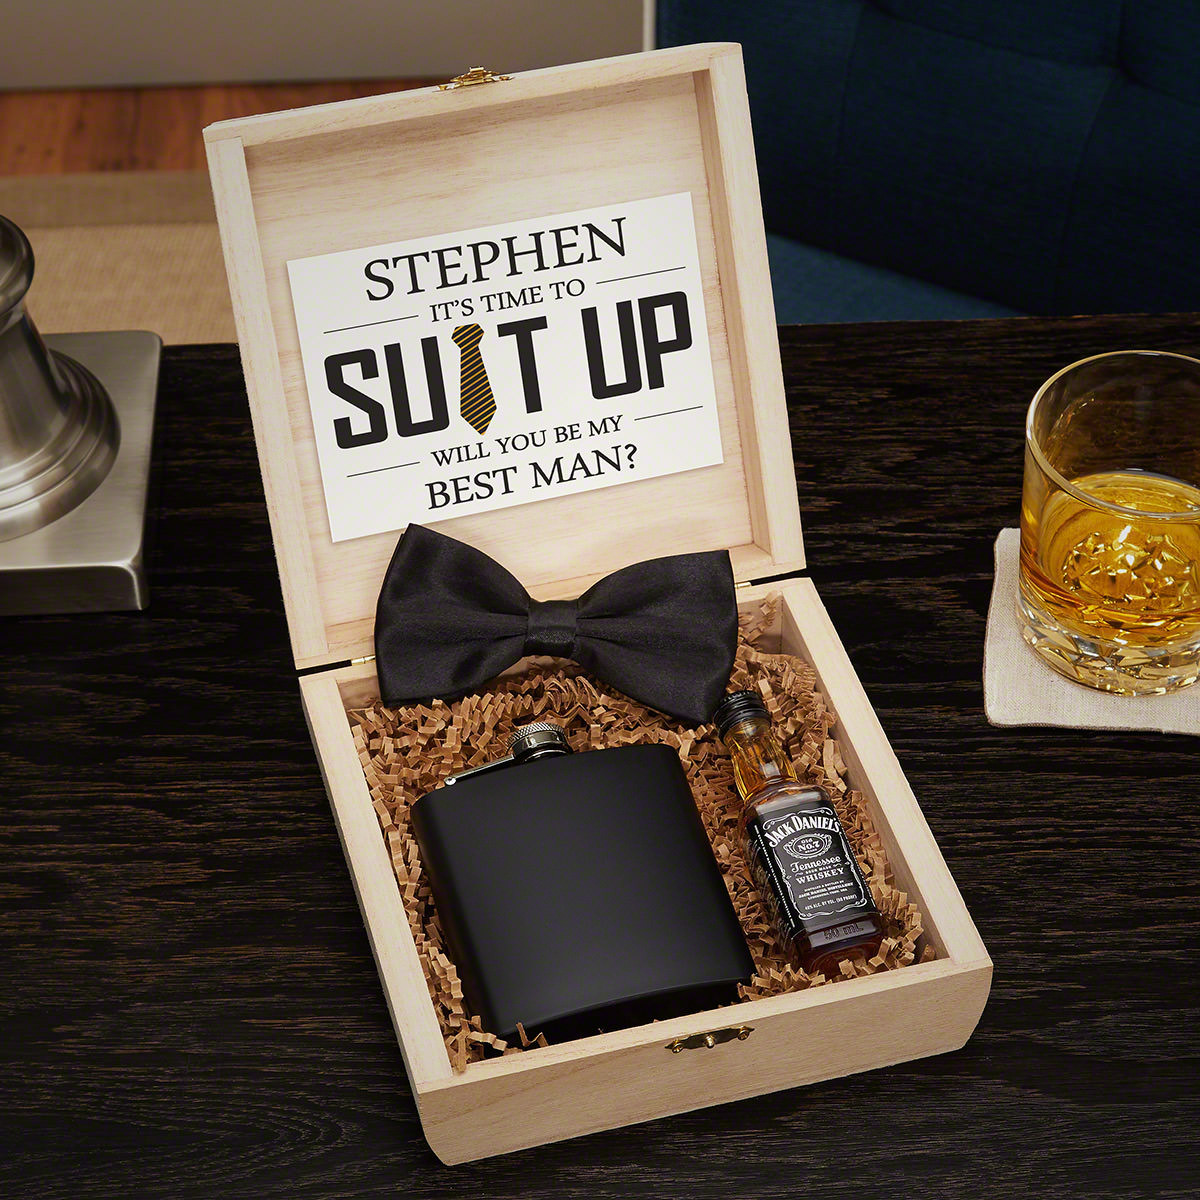 Wedding Party Gift Ideas For Groomsmen
 Personalized Groomsmen Gifts and Wooden Crate Set